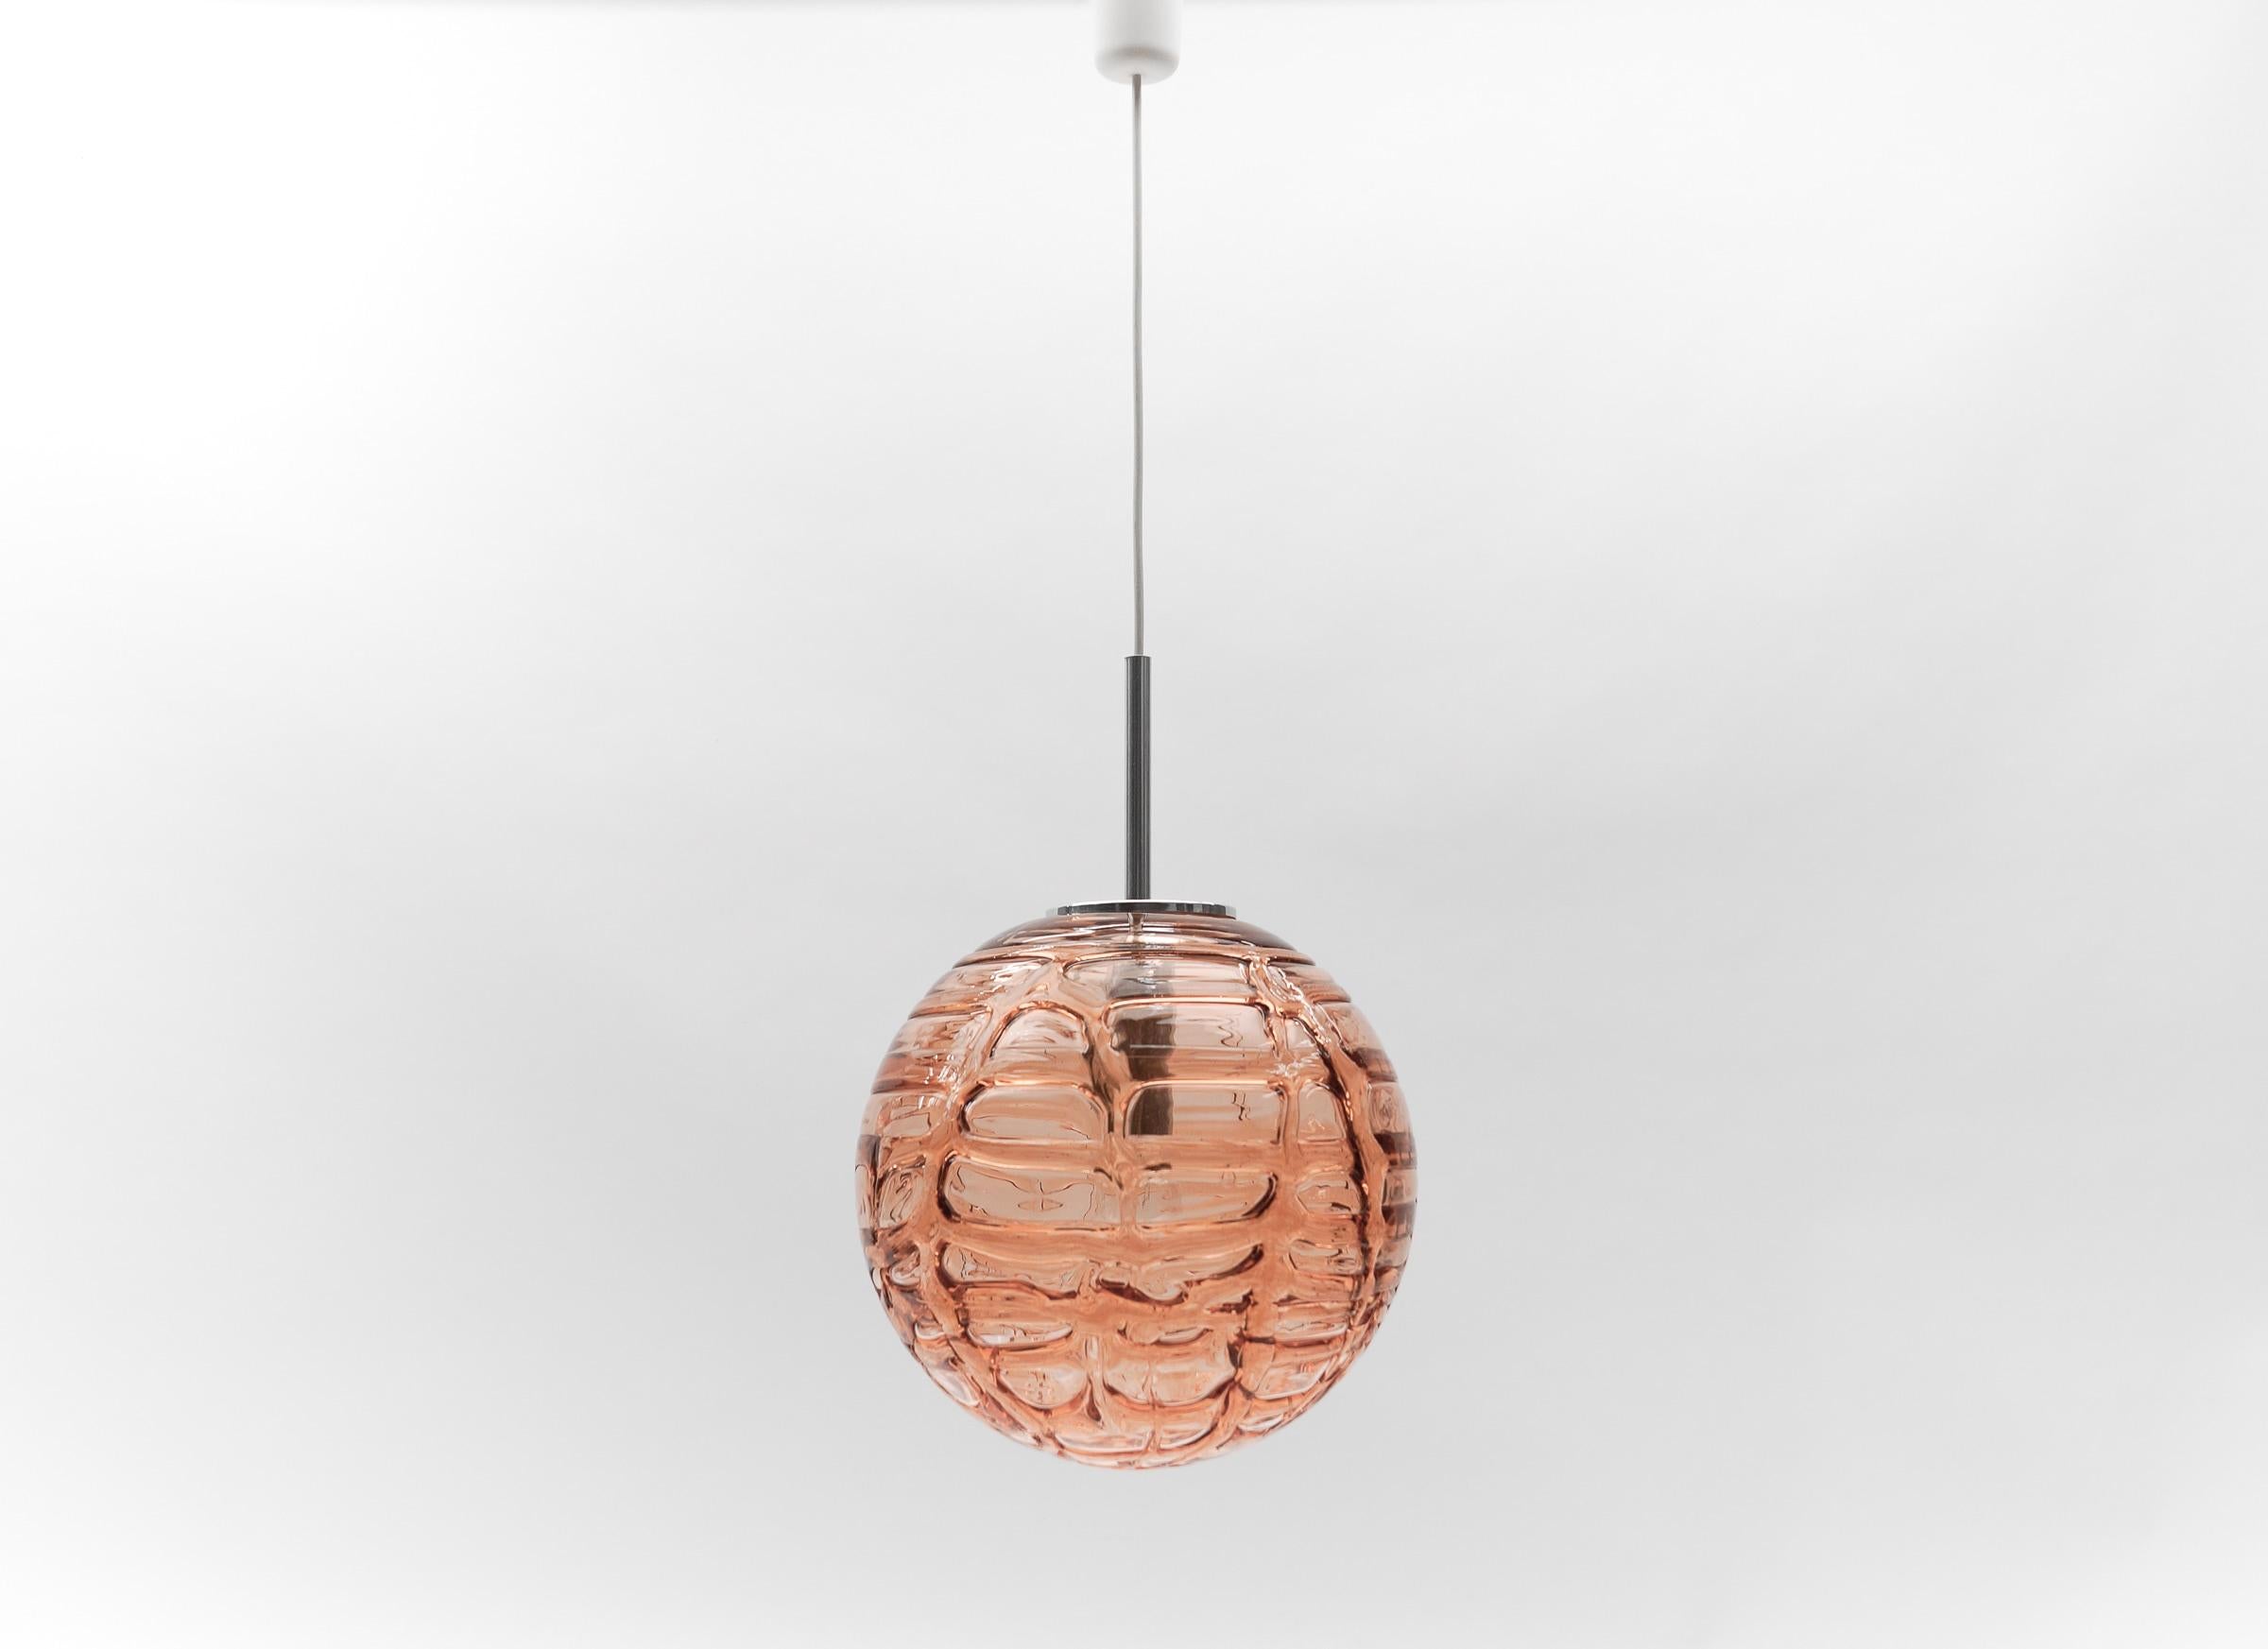 Large Lovely Pink Murano Glass Ball Pendant Lamp by Doria,  1960s Germany 

Dimensions
Diameter: 13.38 in. (34 cm)
Height: 39.37 in. (100 cm)

One E27 socket. Works with 220V and 110V.

Our lamps are checked, cleaned and are suitable for use in the